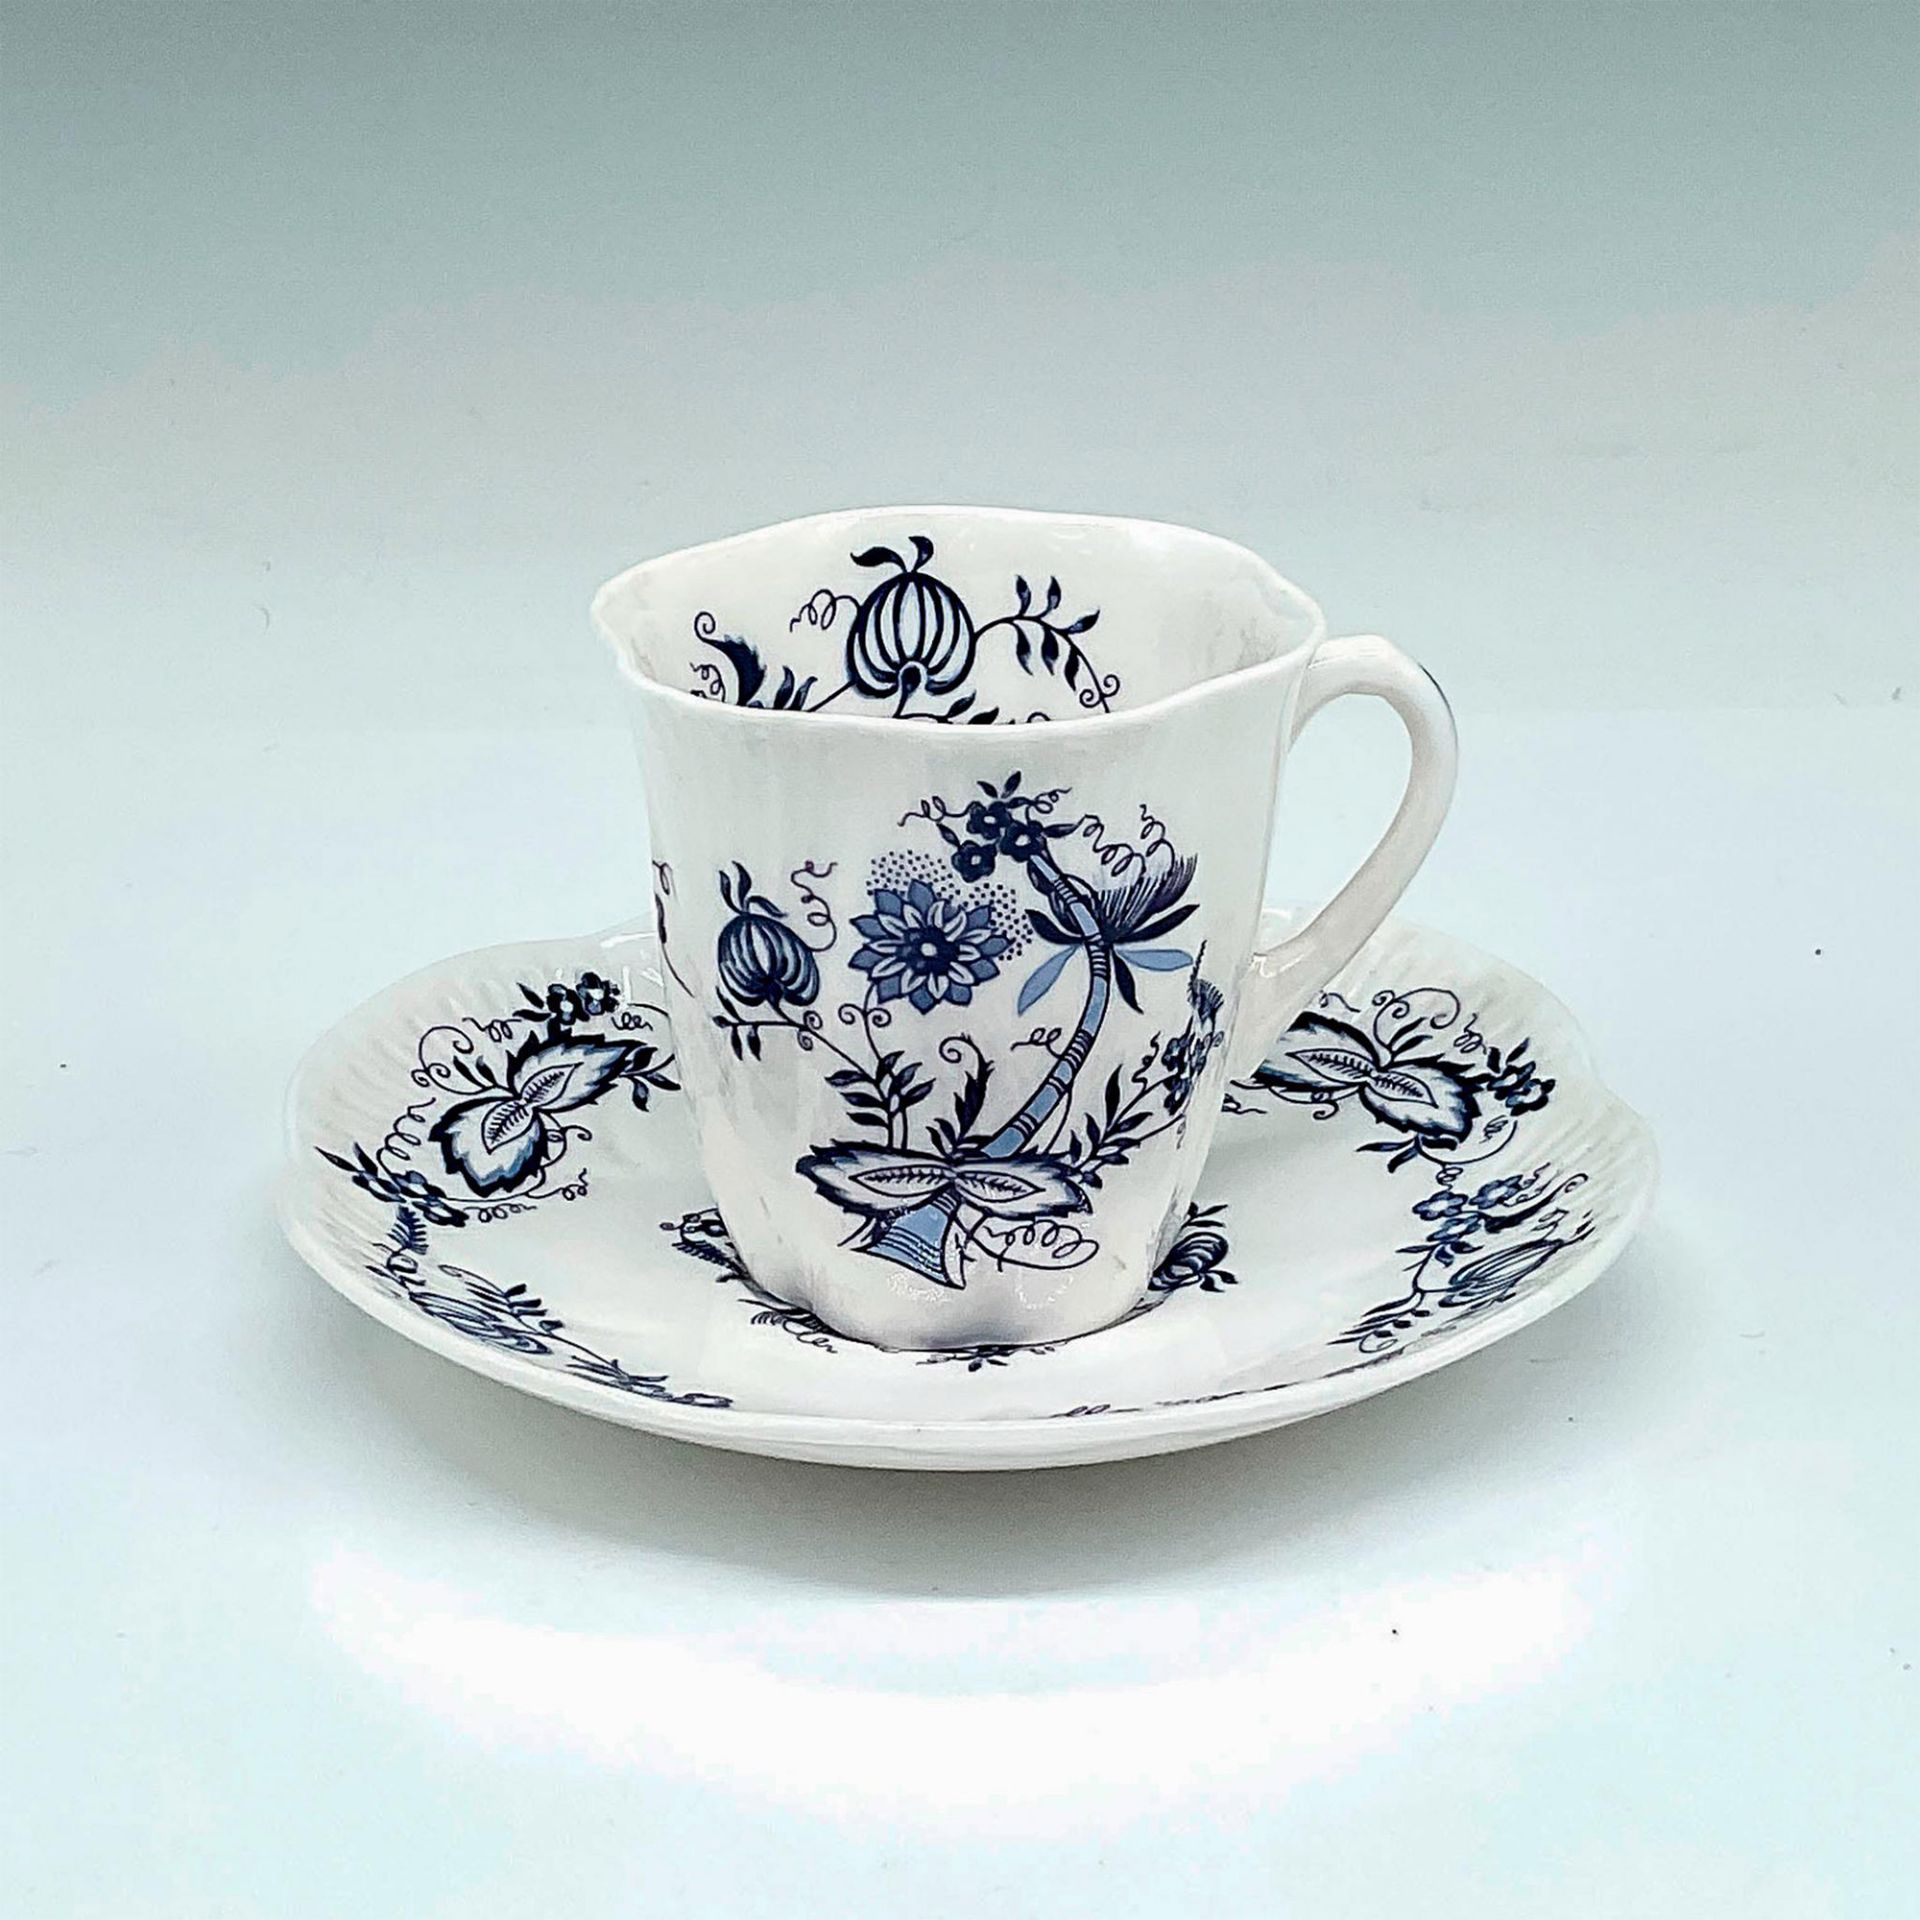 2pc Shelley Bone China Teacup and Saucer, Meissenette